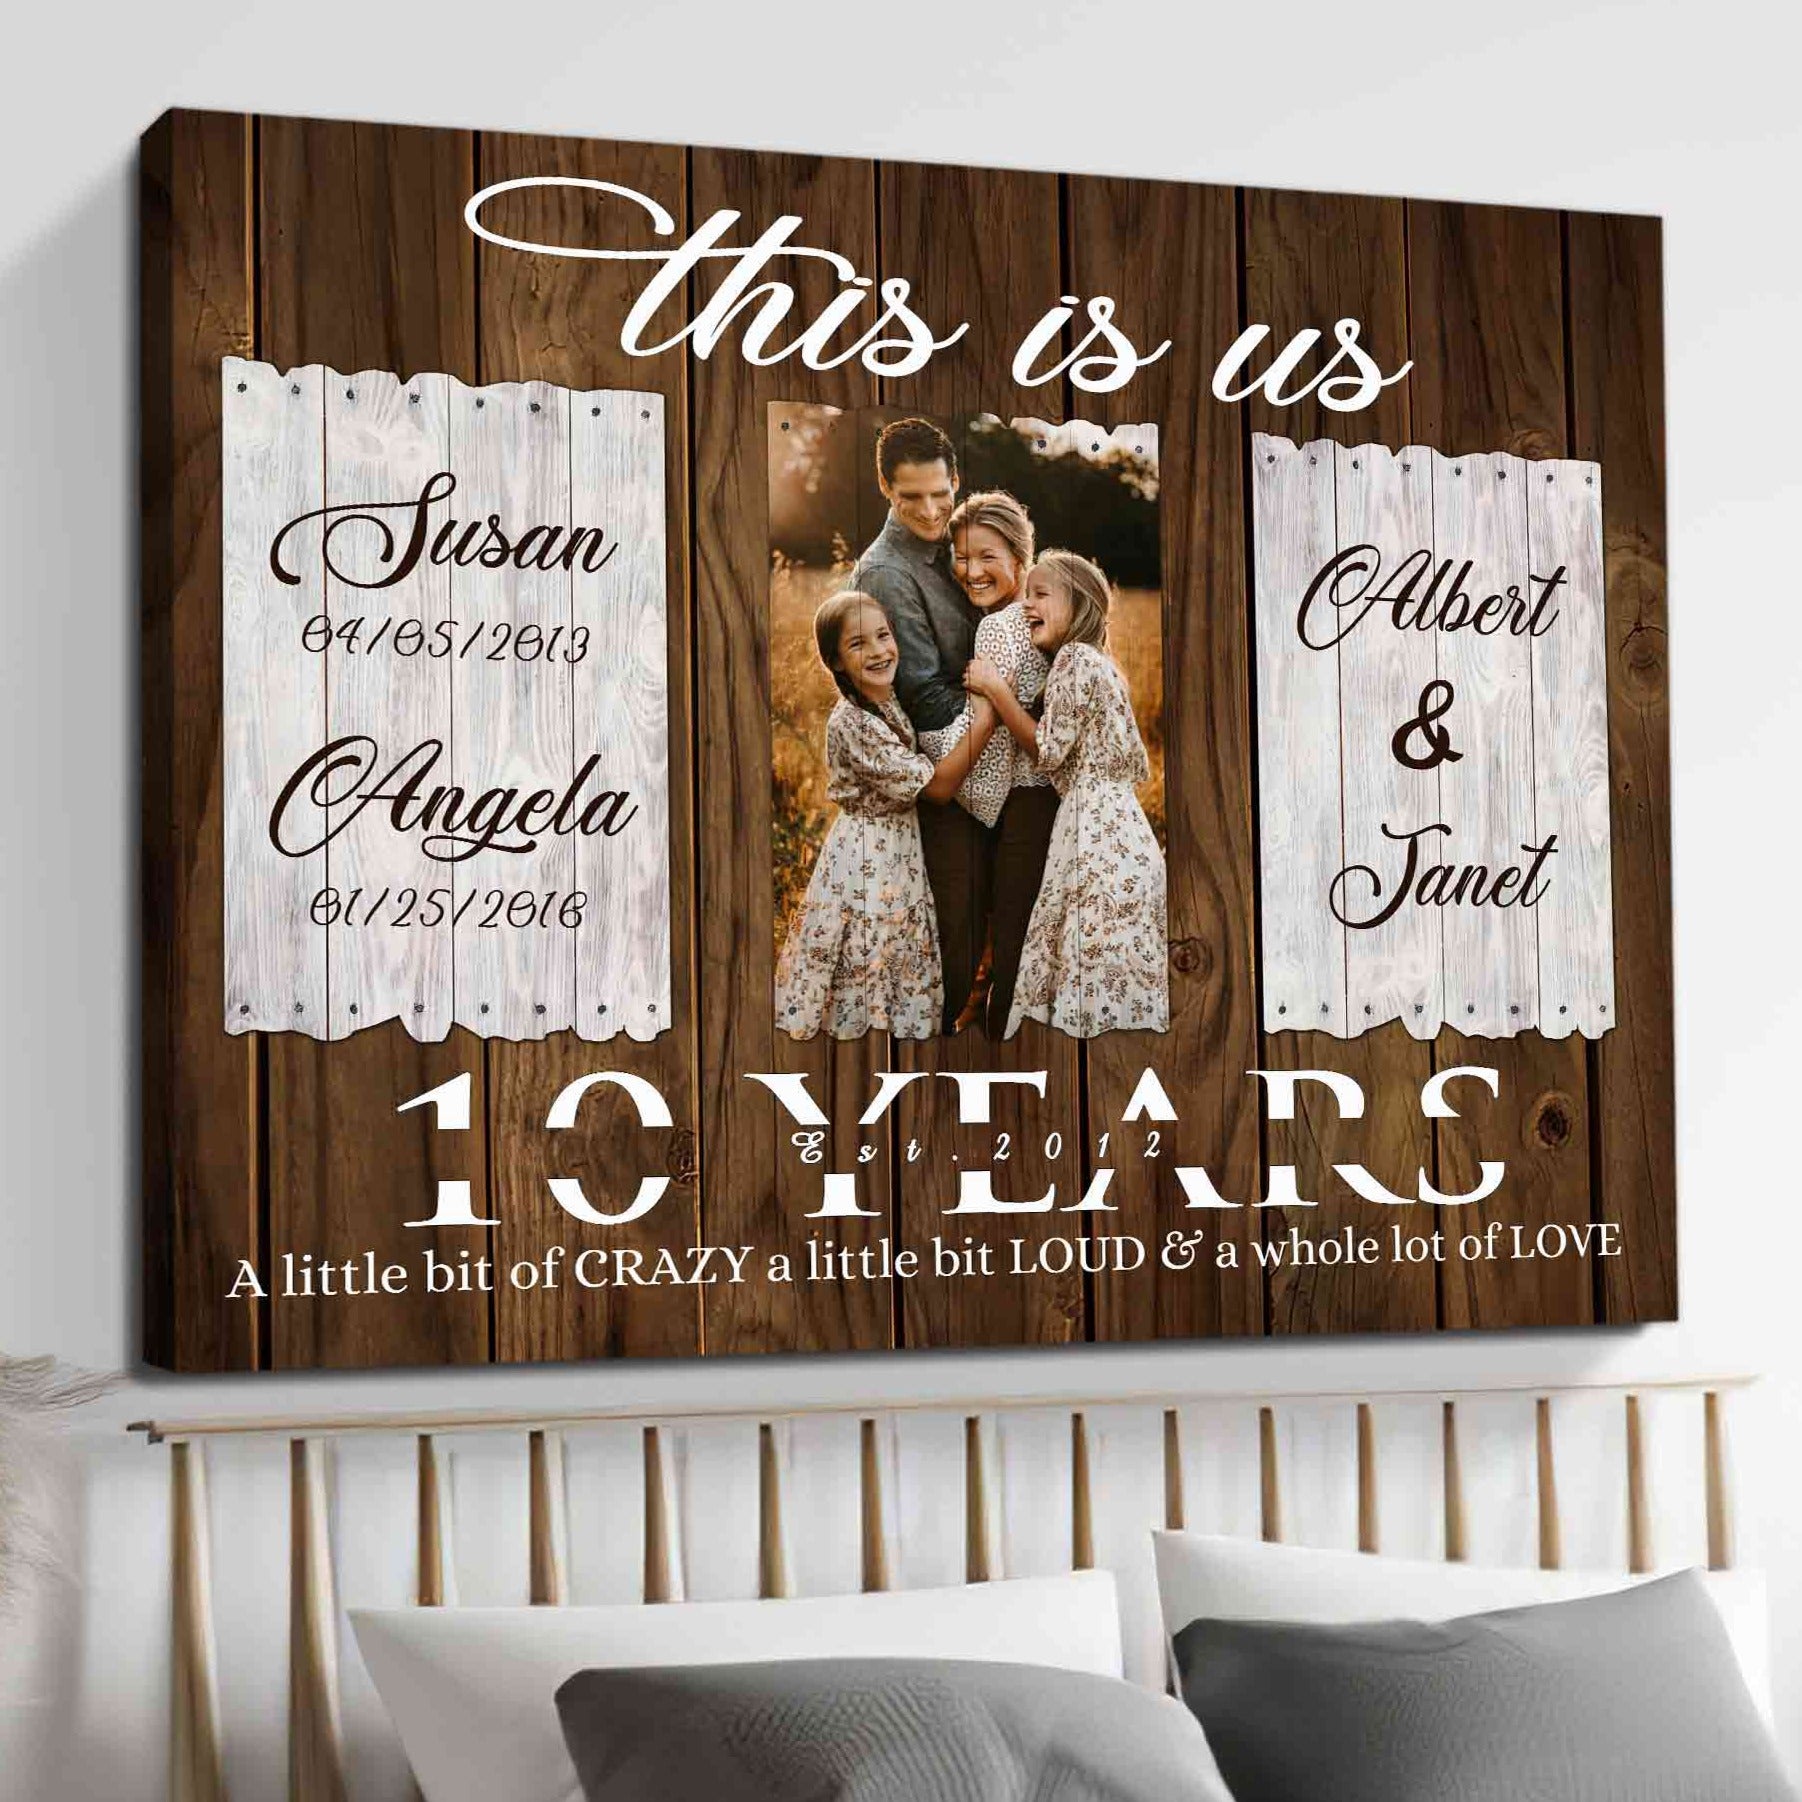 10th Anniversary Sign PERSONALIZED Gift 10 Year Wedding Anniversary for Him  Her Wife Husband Couple - SOLID WOOD - Made in the USA